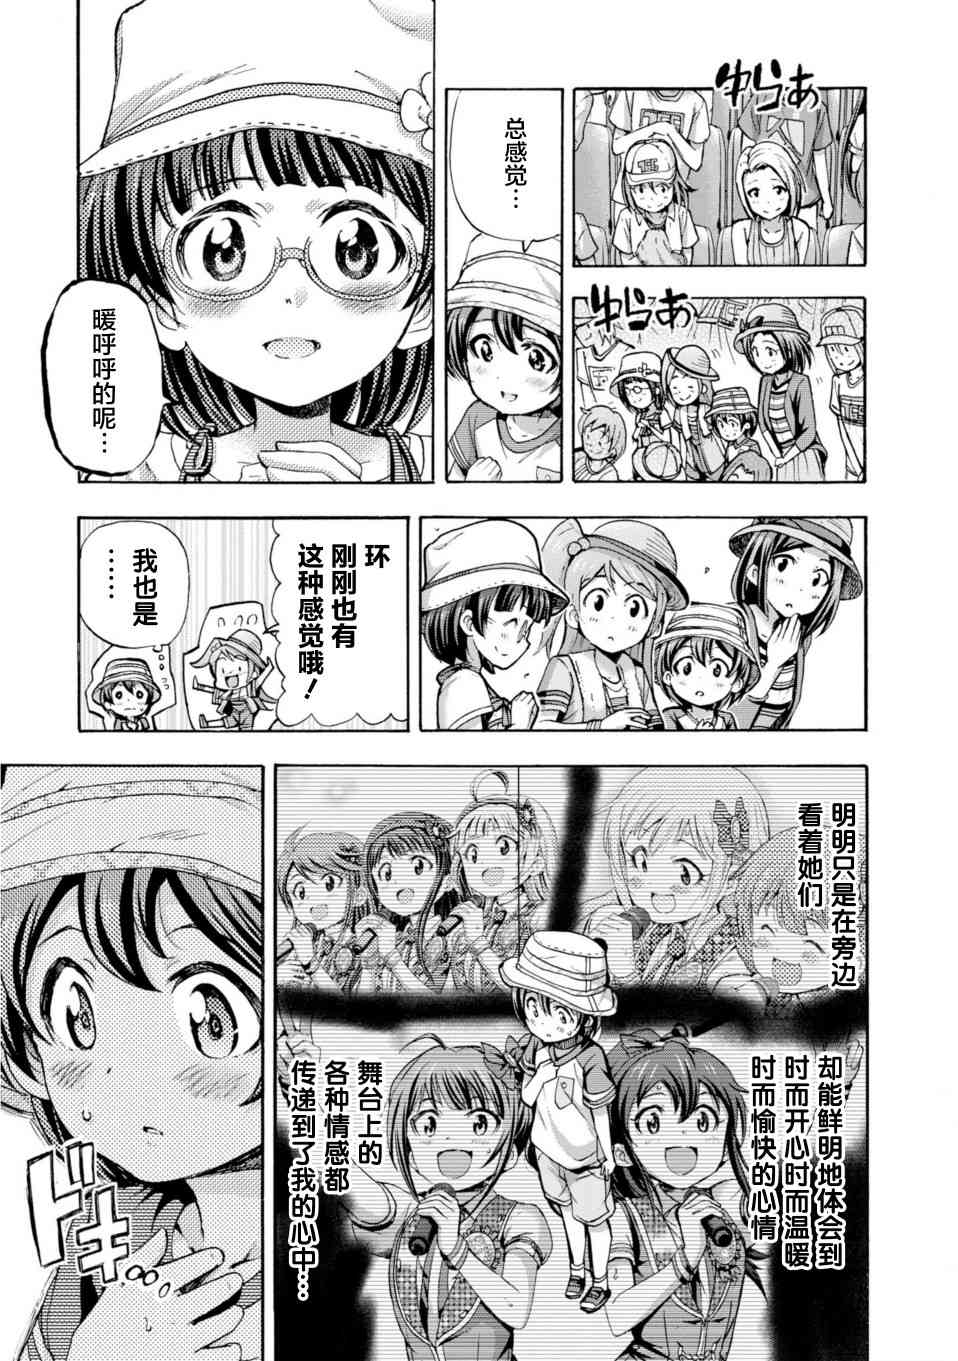 THE IDOLM@STER MILLION LIVE! Blooming Clover - 17話 - 3